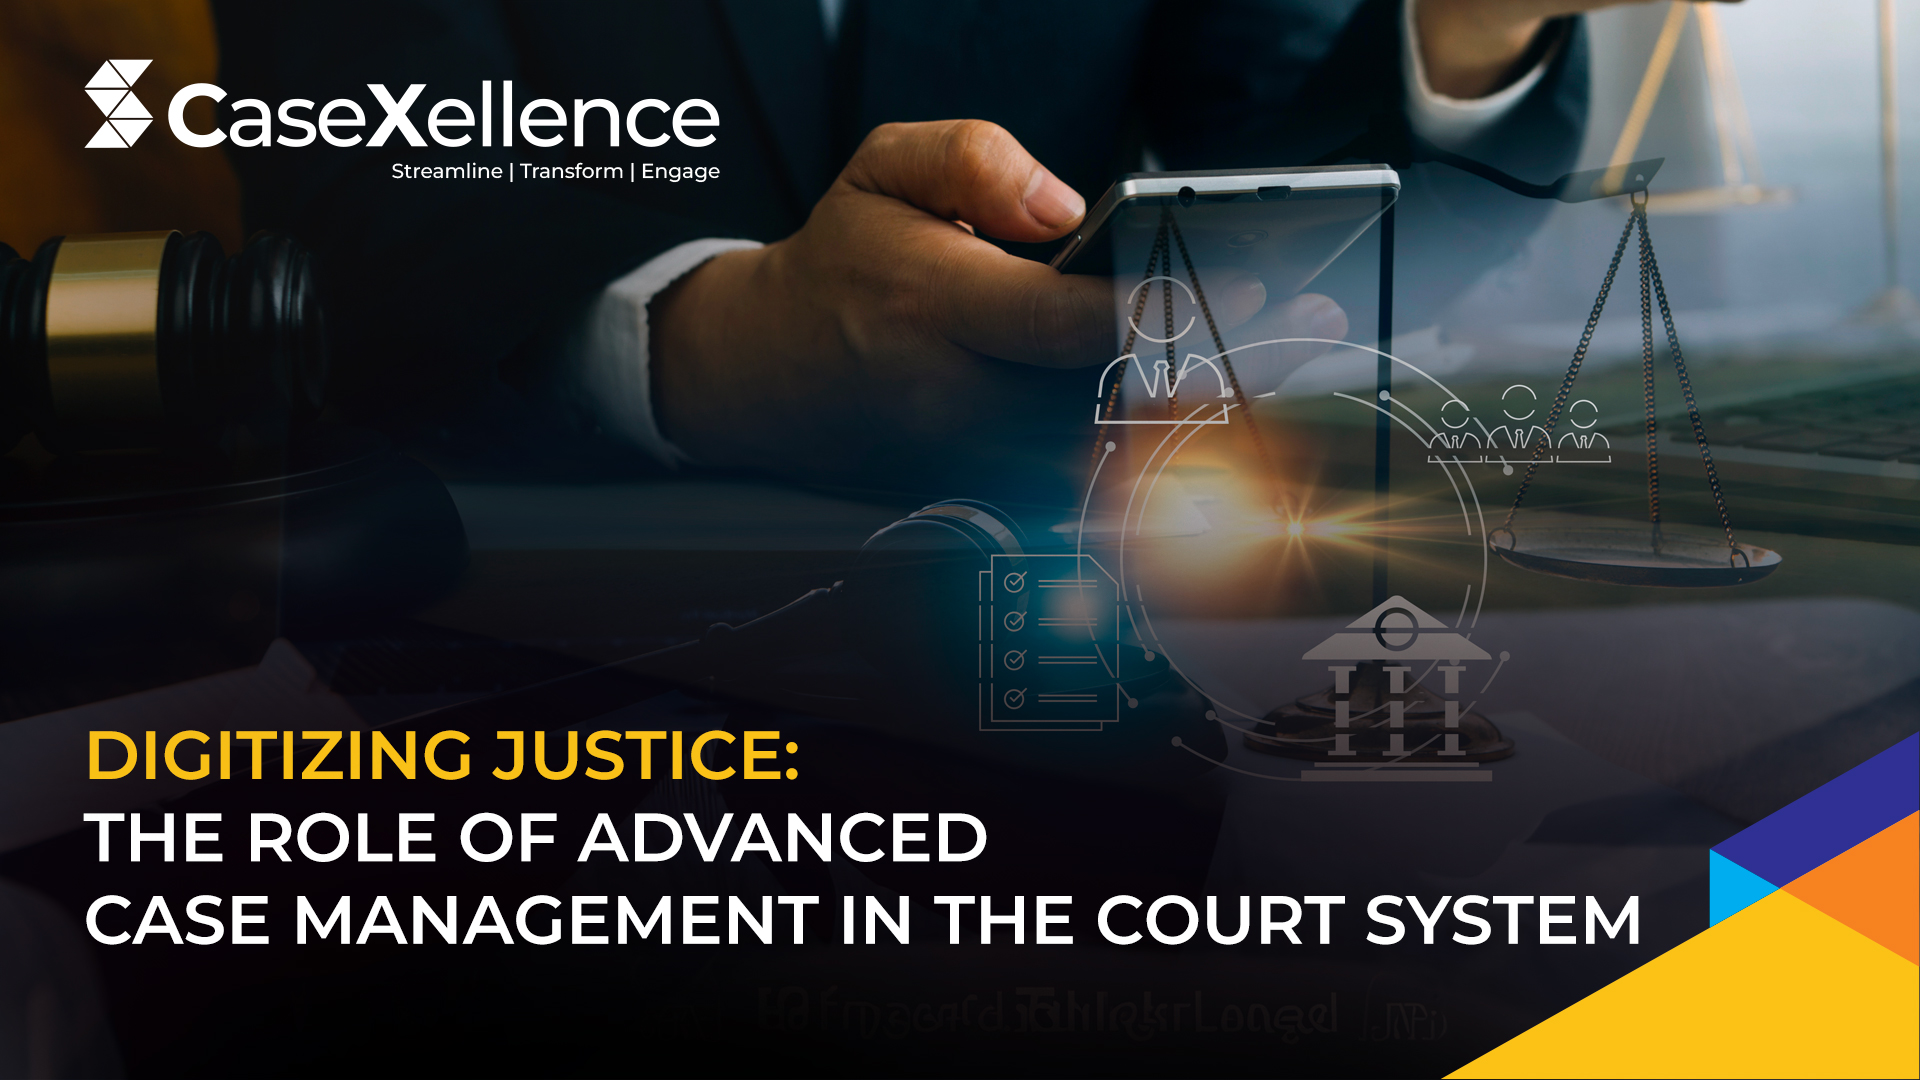 Digitizing Justice: The Role of Advanced Case Management in the Court System